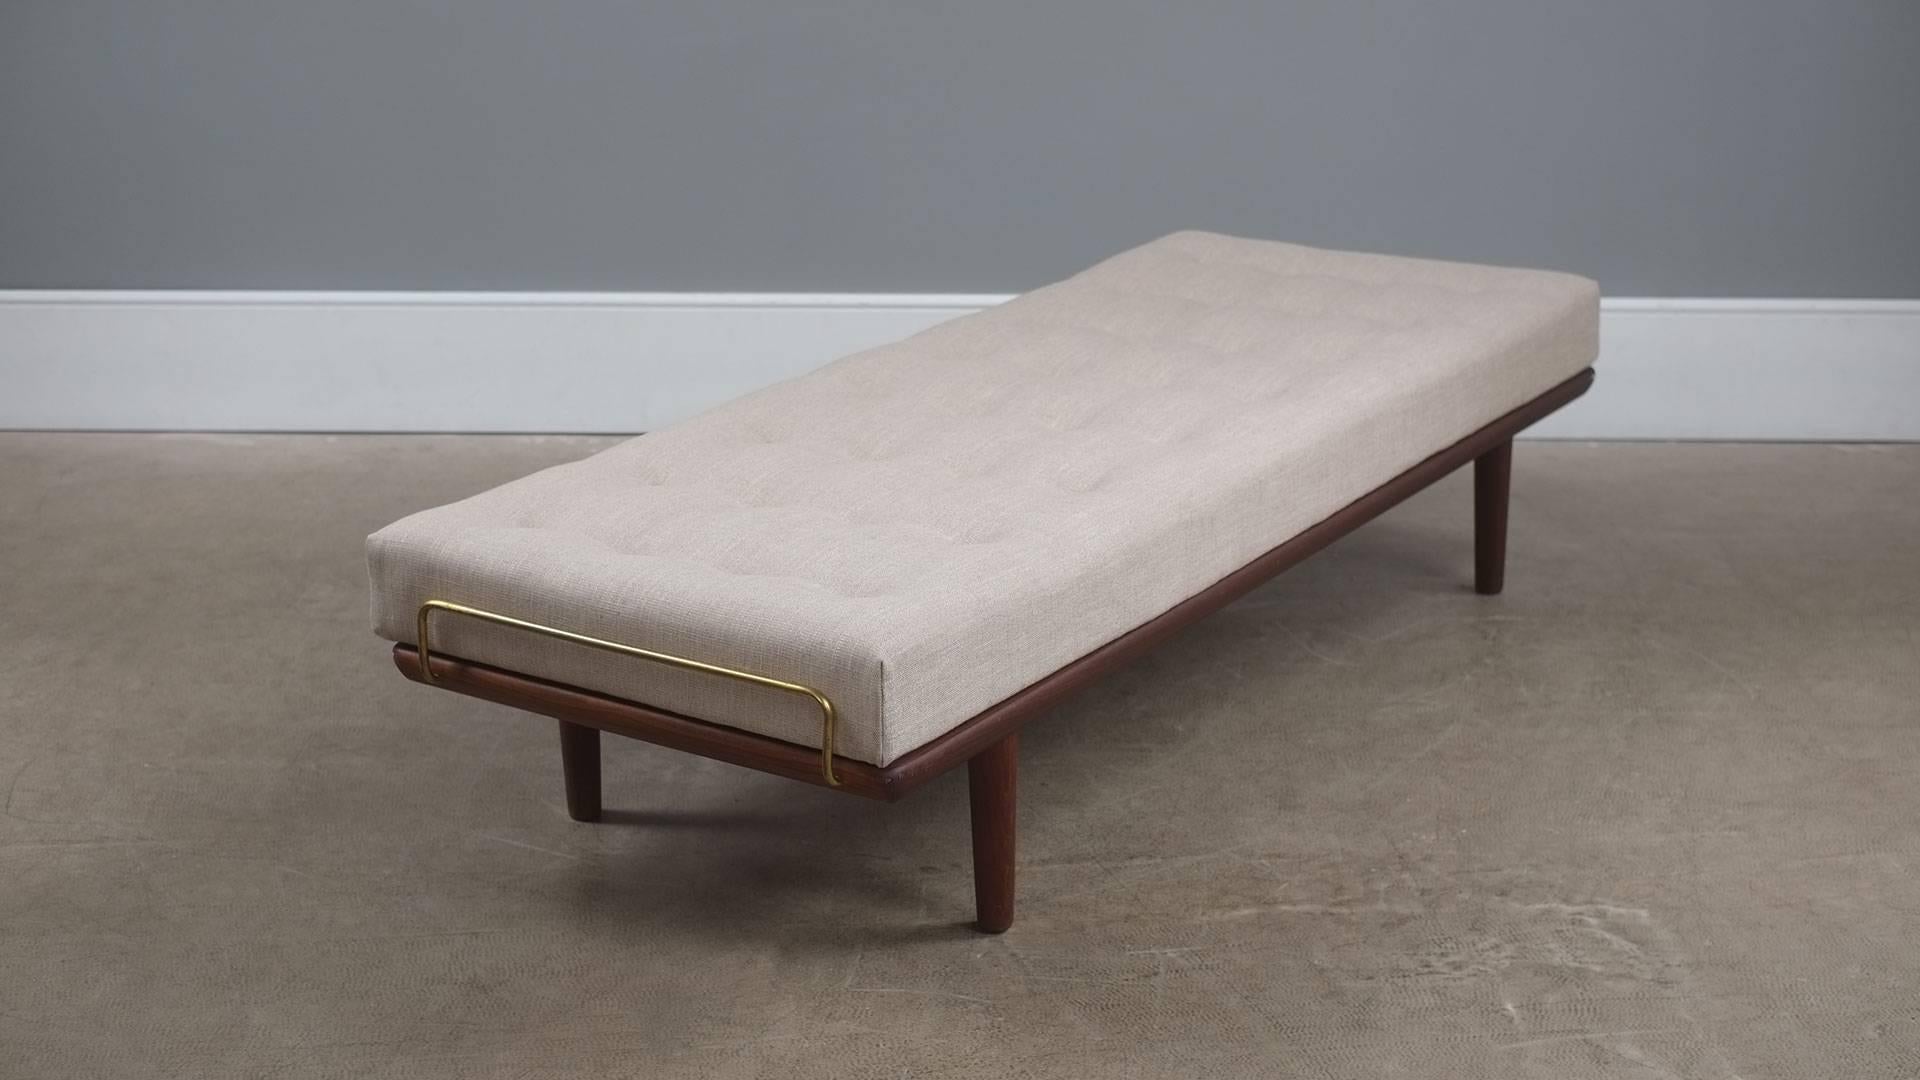 Superb daybed in teak designed by Hans Wegner for Getama, Denmark. This example with fully refurbished original sprung mattress and beautiful new upholstery including buttons covered in contrasting cognac leather.